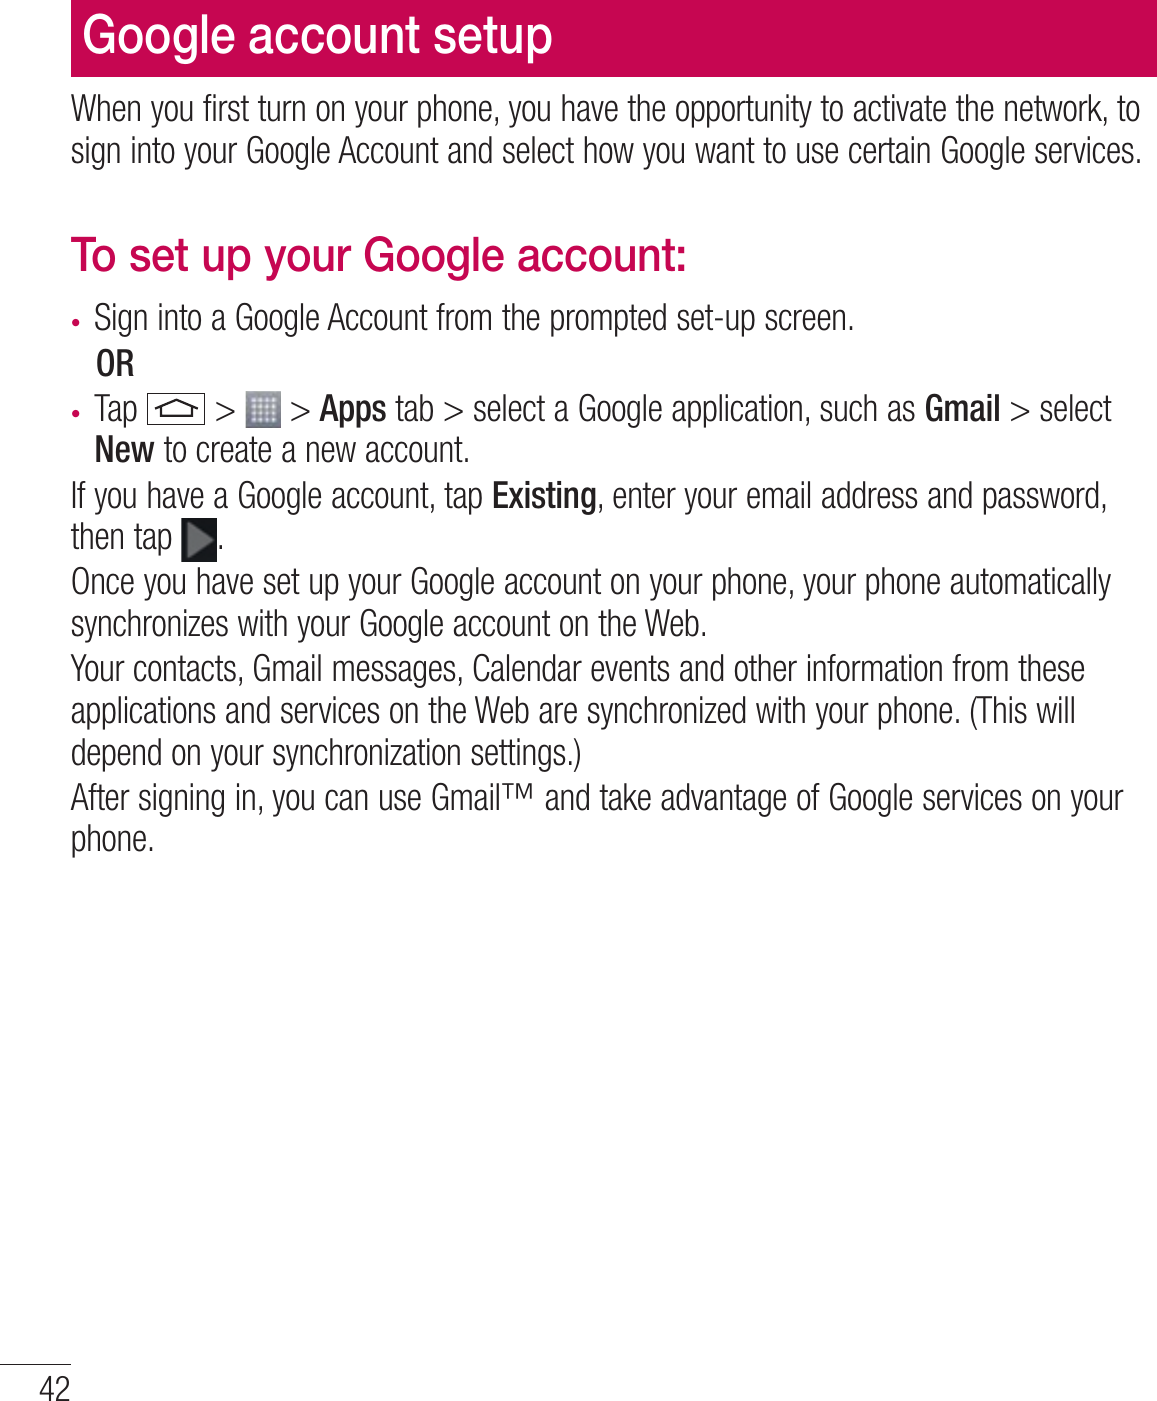 42Google account setupWhen you first turn on your phone, you have the opportunity to activate the network, to sign into your Google Account and select how you want to use certain Google services. To set up your Google account: t Sign into a Google Account from the prompted set-up screen. OR t Tap   &gt;   &gt; Apps tab &gt; select a Google application, such as Gmail &gt; select New to create a new account. If you have a Google account, tap Existing, enter your email address and password, then tap  .Once you have set up your Google account on your phone, your phone automatically synchronizes with your Google account on the Web.Your contacts, Gmail messages, Calendar events and other information from these applications and services on the Web are synchronized with your phone. (This will depend on your synchronization settings.)After signing in, you can use Gmail™ and take advantage of Google services on your phone.